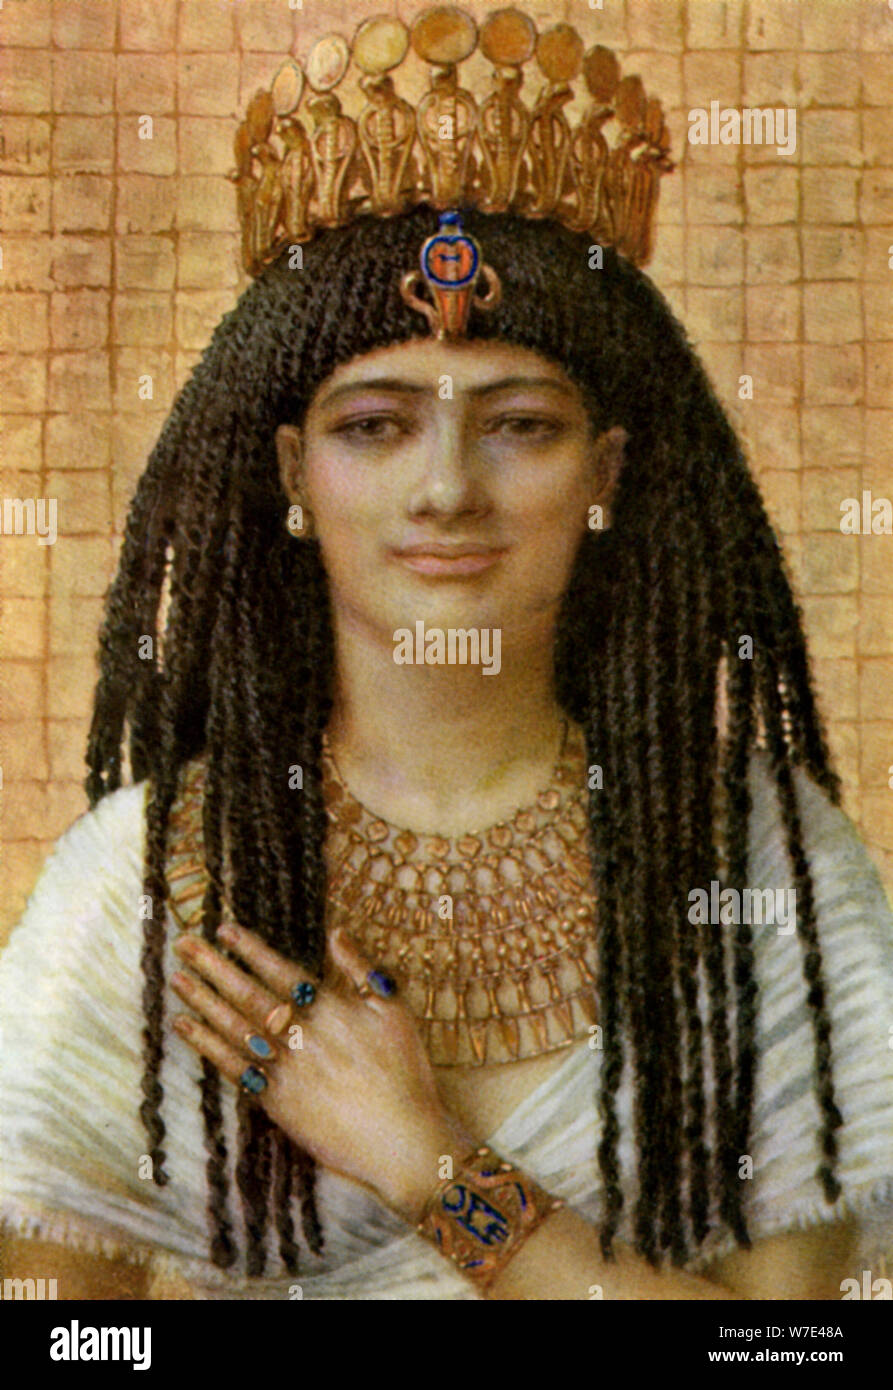 Mutnezemt Ancient Egyptian Queen Of The 18th Dynasty 14th